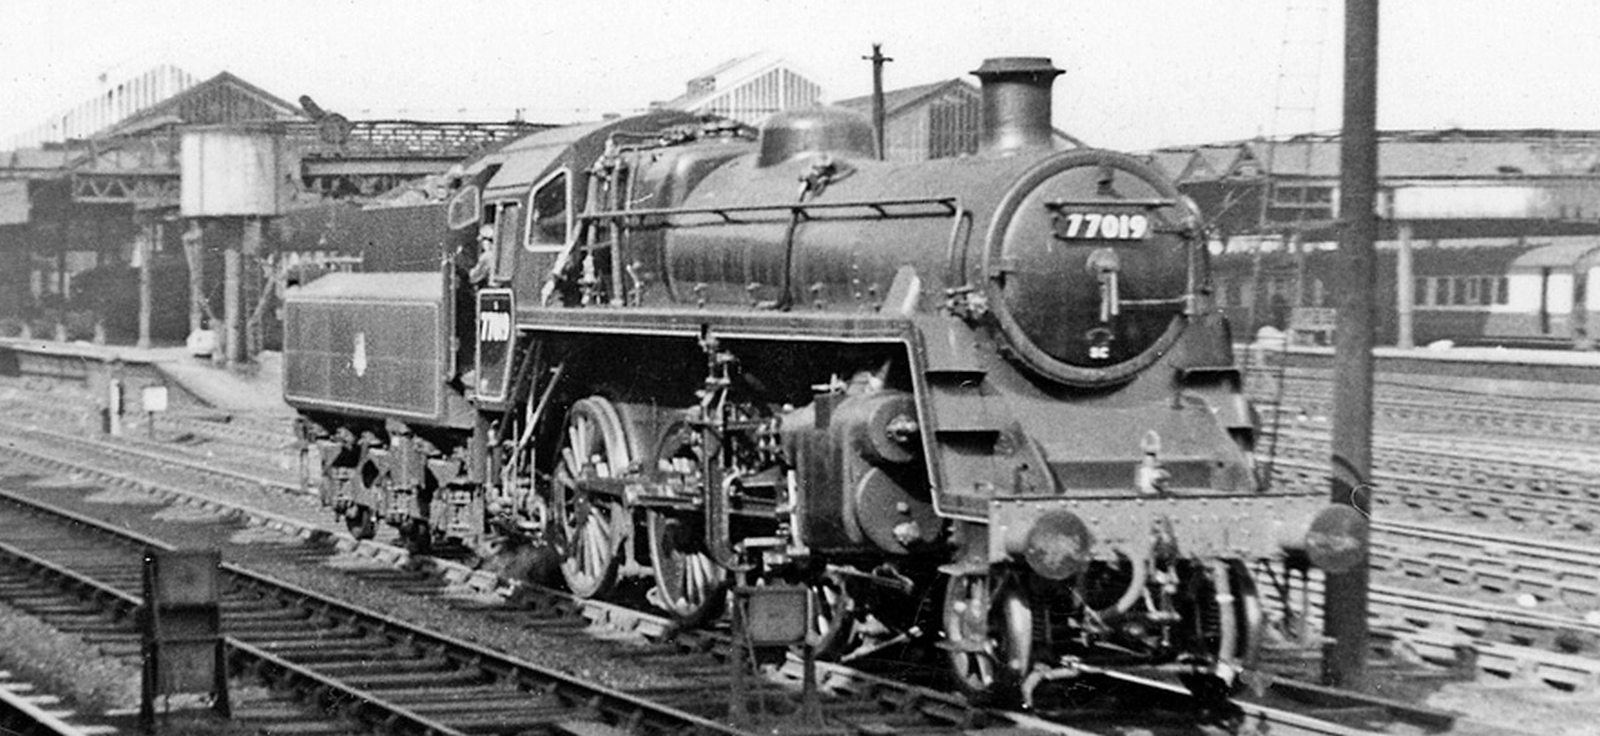 No. 77019 immediately after delivery in September 1954 at Crewe